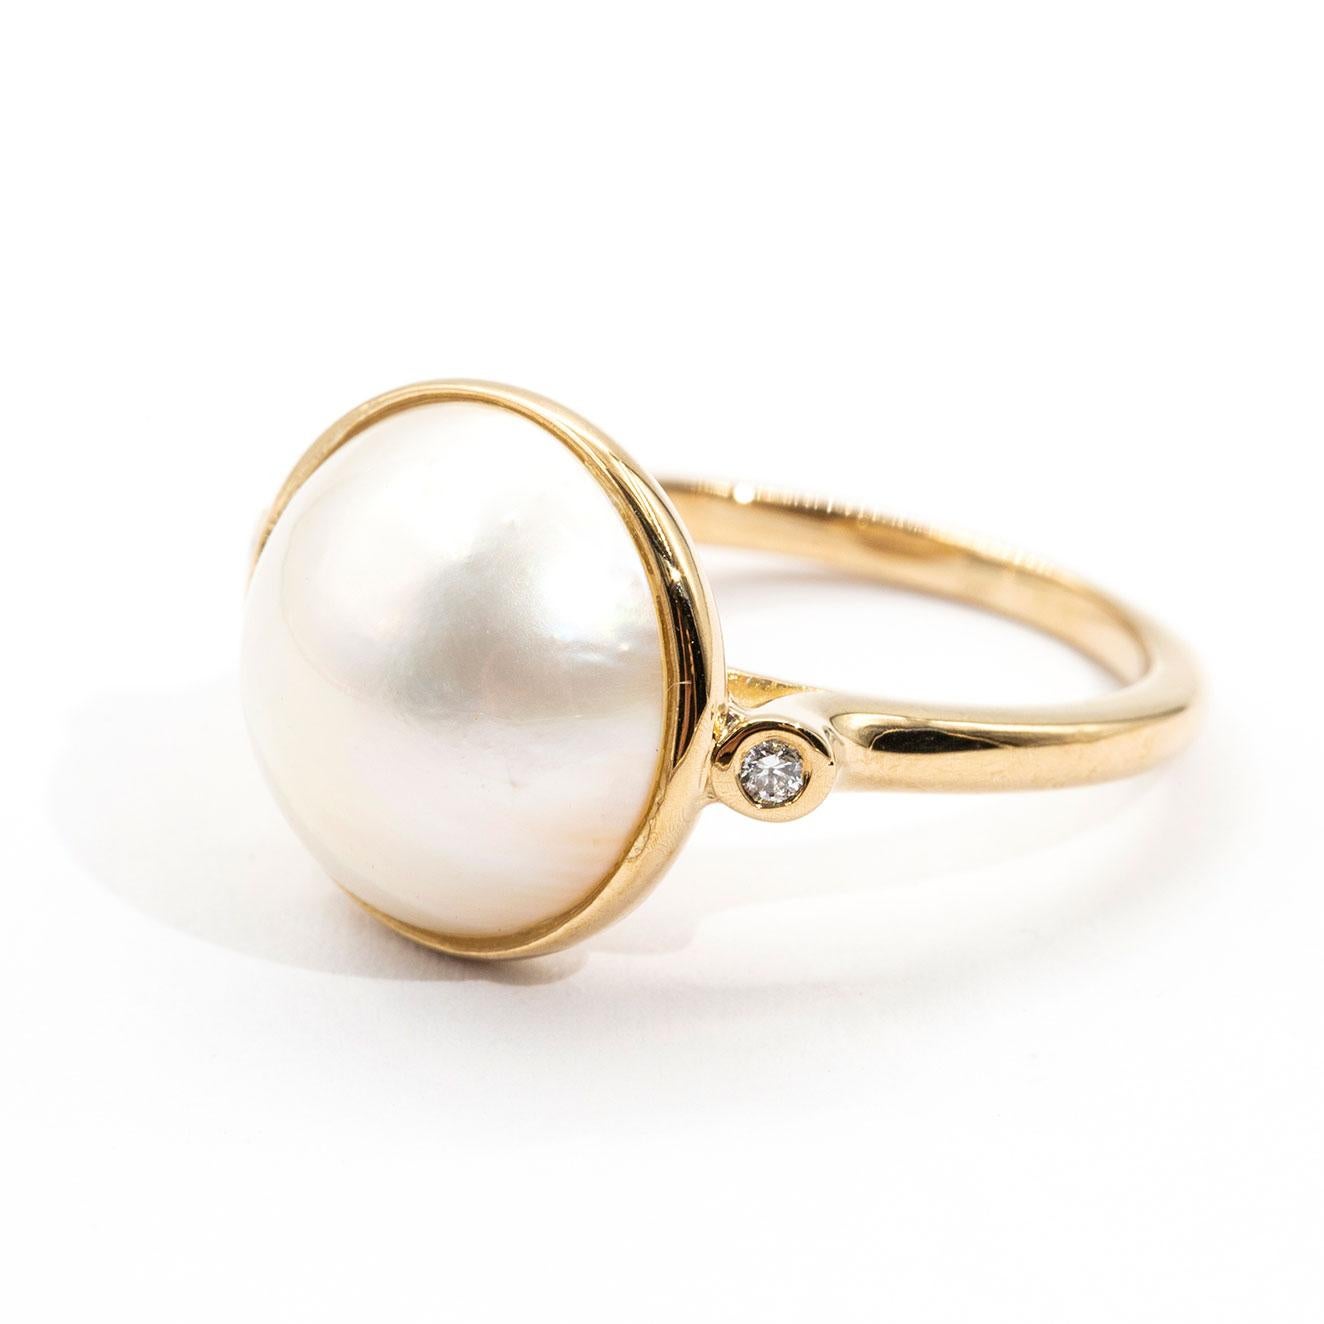 Forged in 9 carat yellow gold is this lovely vintage ring that features a central white mabe pearl flanked by two round diamonds. We have named this darling ring The Dianna Ring. The Dianna Ring is a heart warming traditional design that transitions